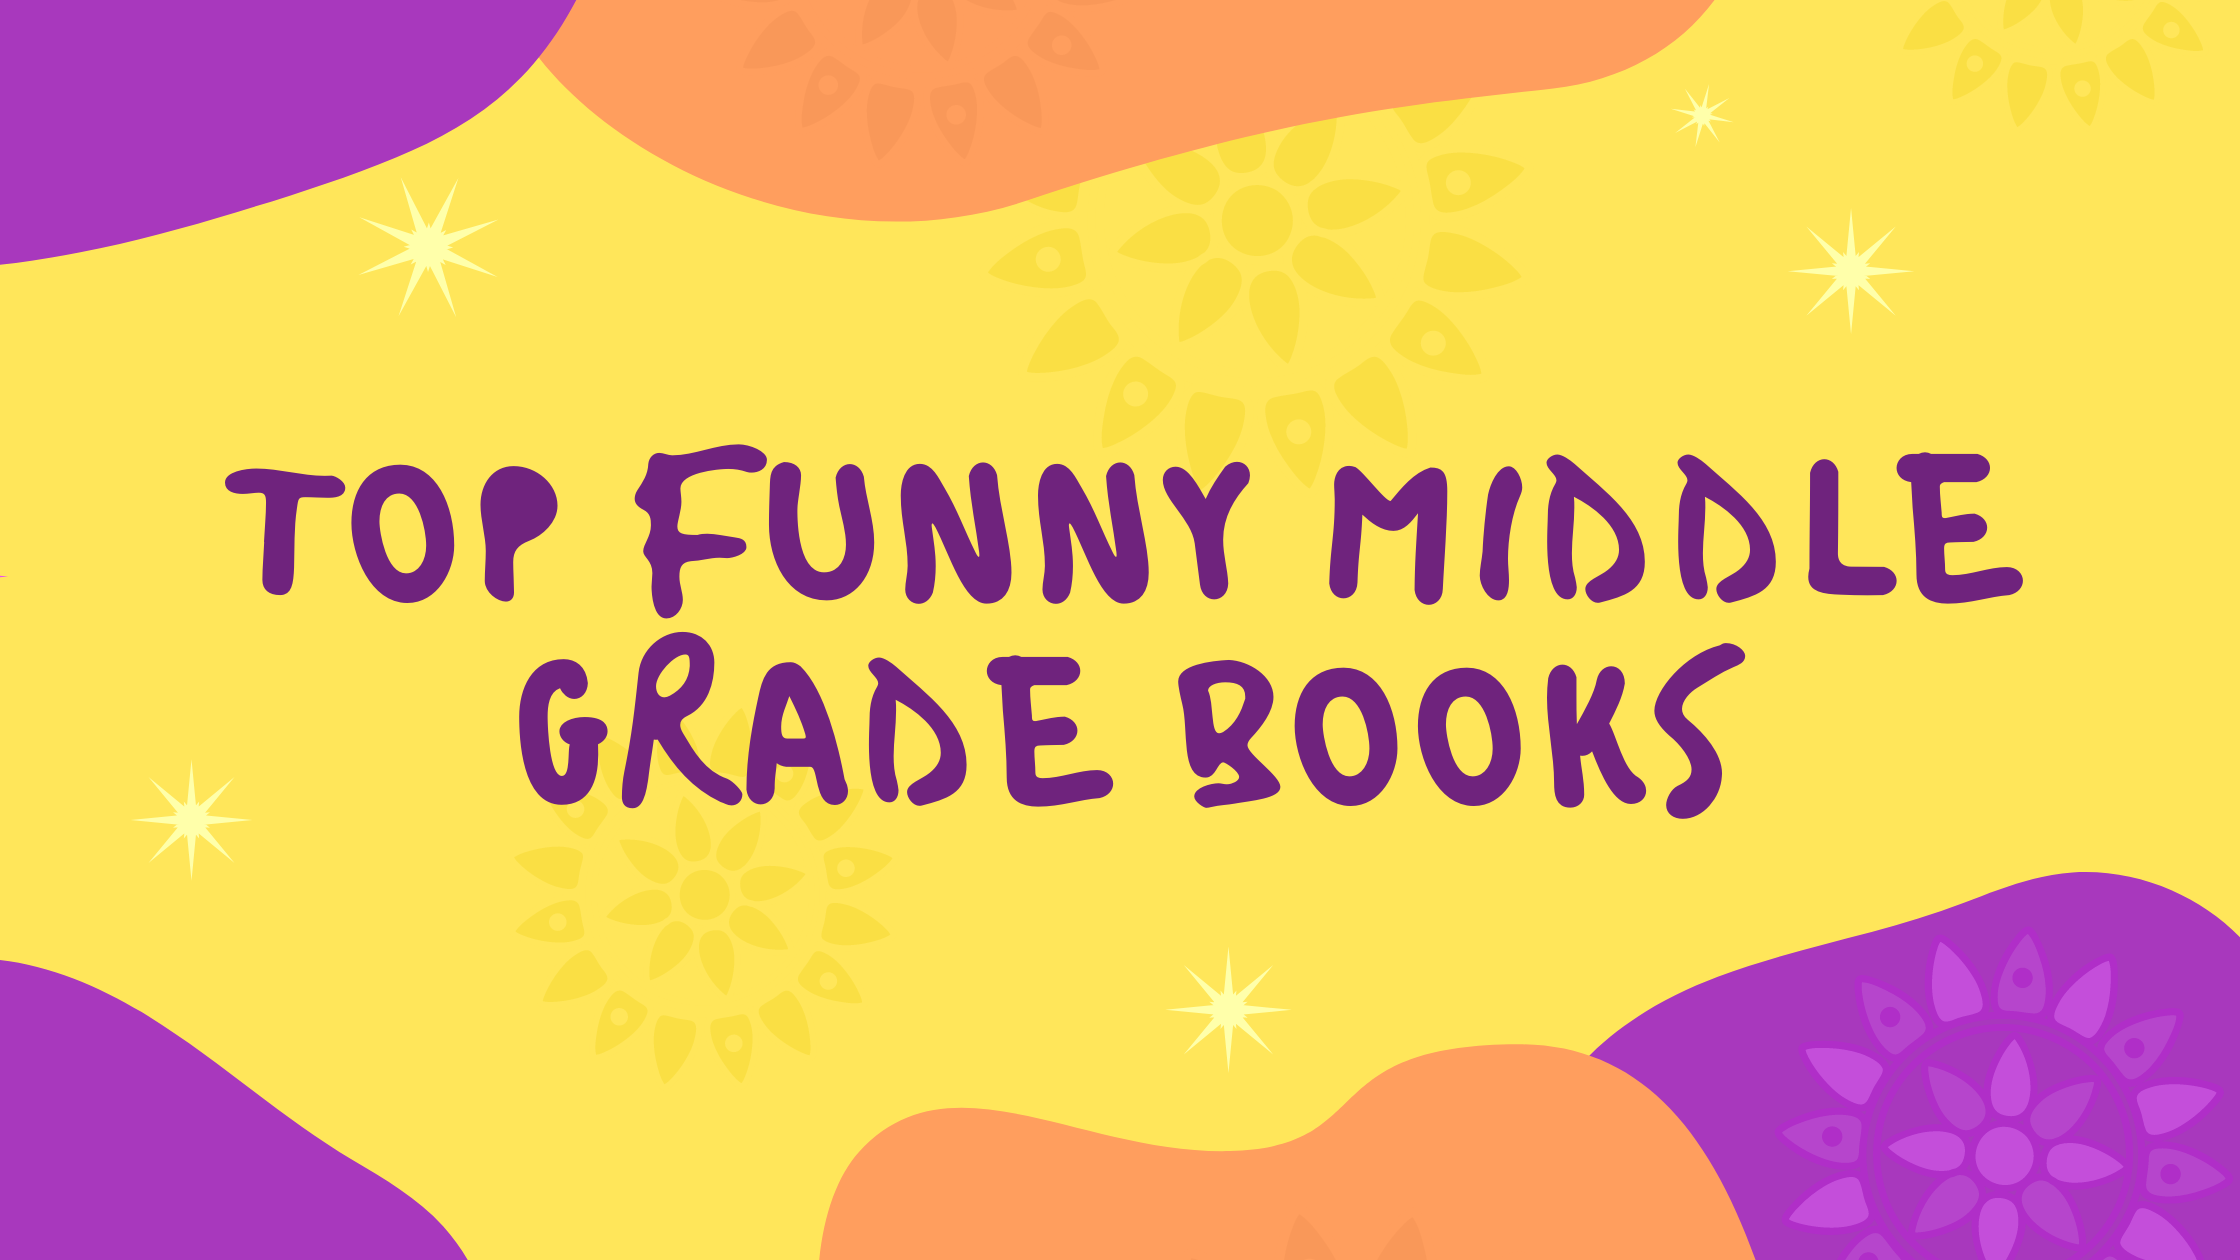 My top funny middle grade book recommendations